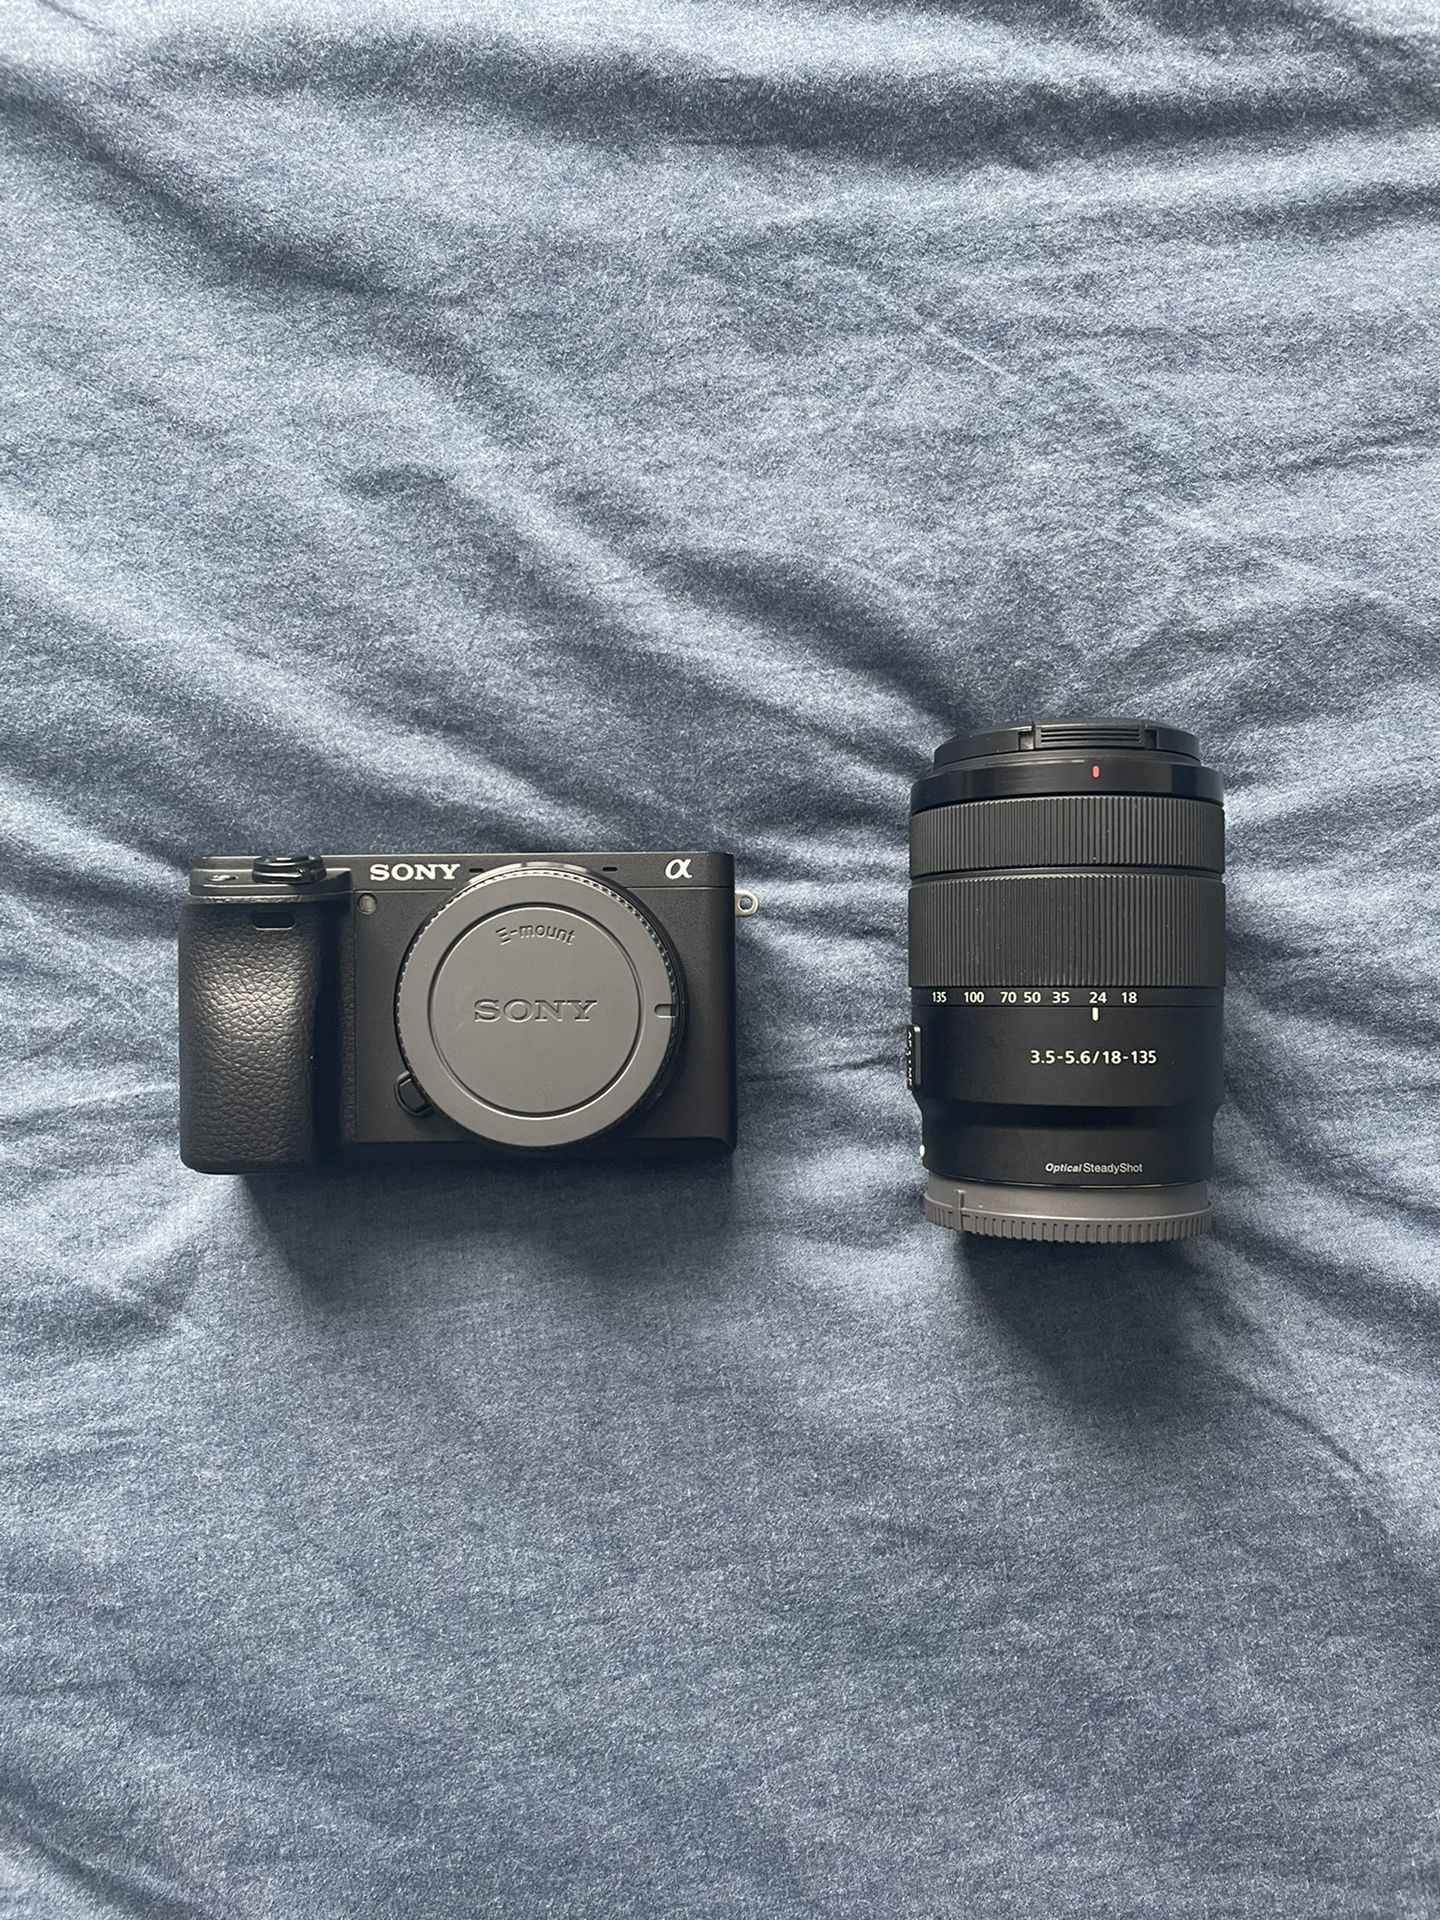 Sony a6400 with 18-135mm Lens